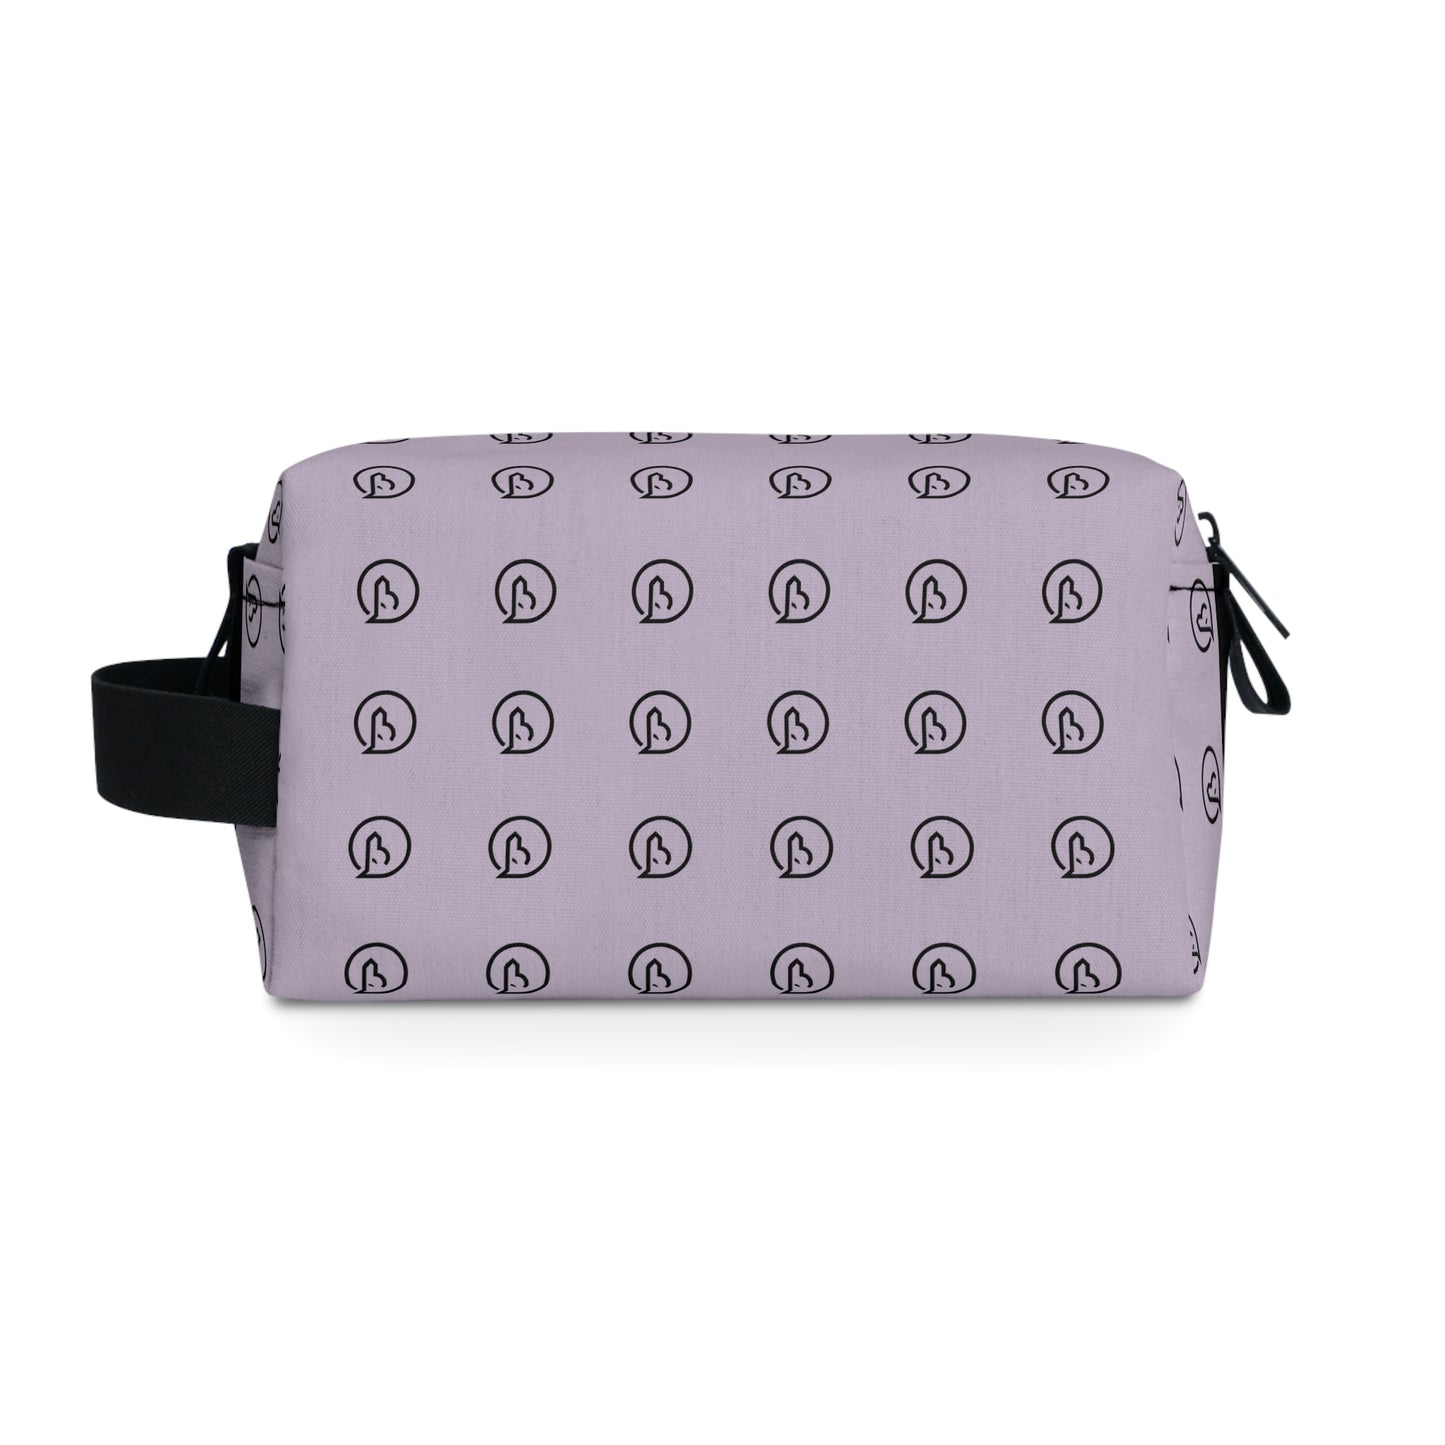 Humble Sportswear, toiletry bag, ditty bag, Dopp kit, cosmetic bags, travel pouch